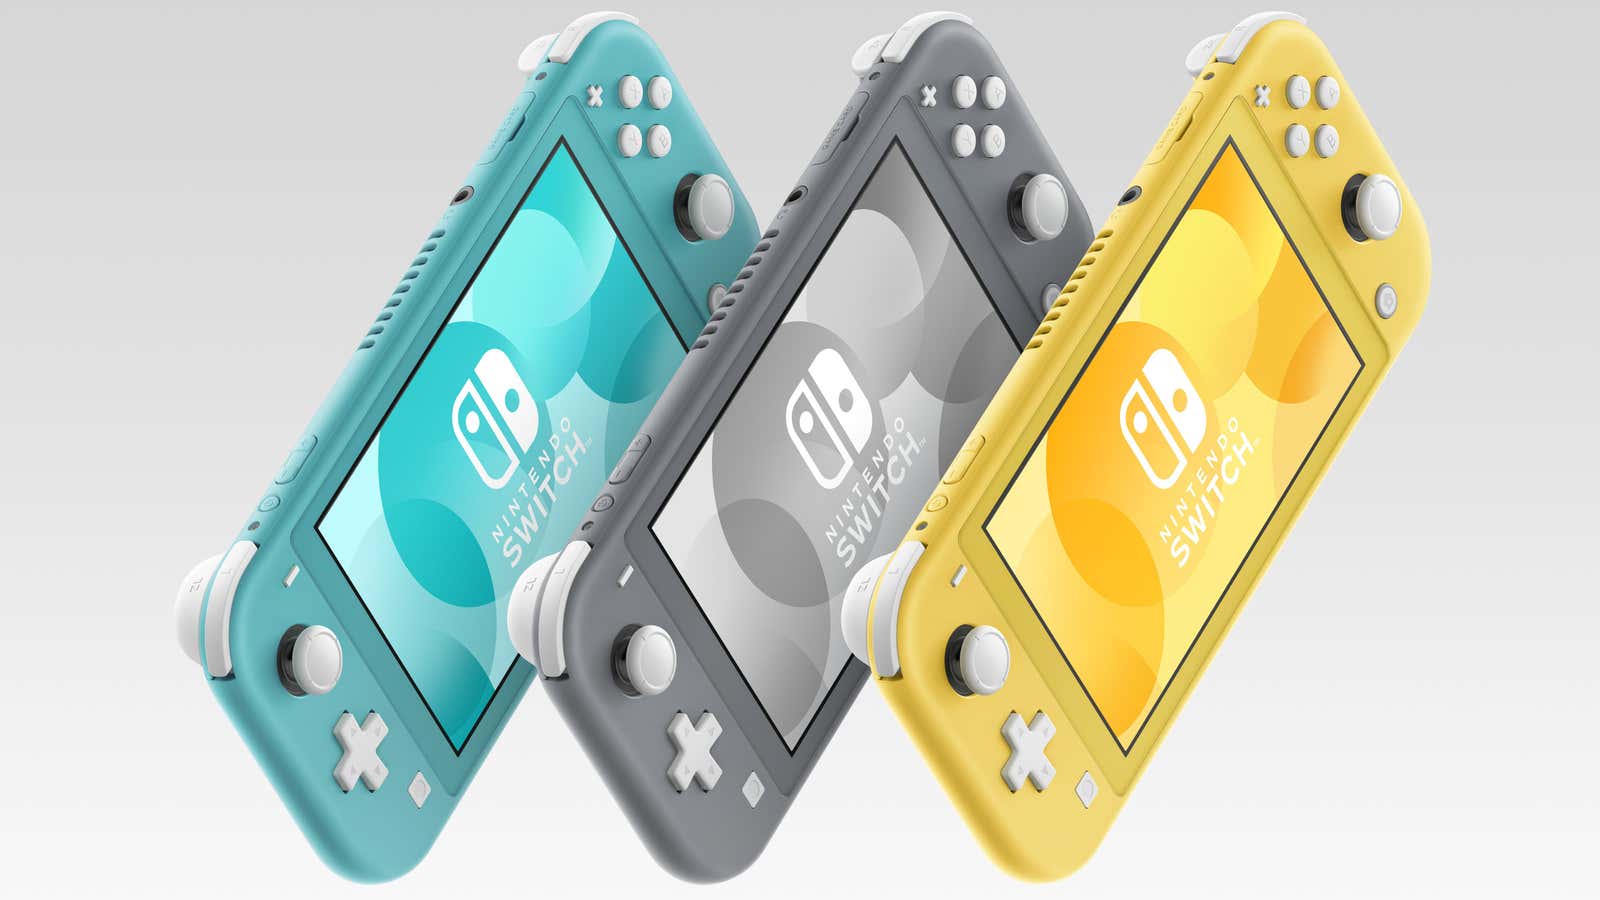 The new Switch Lite.